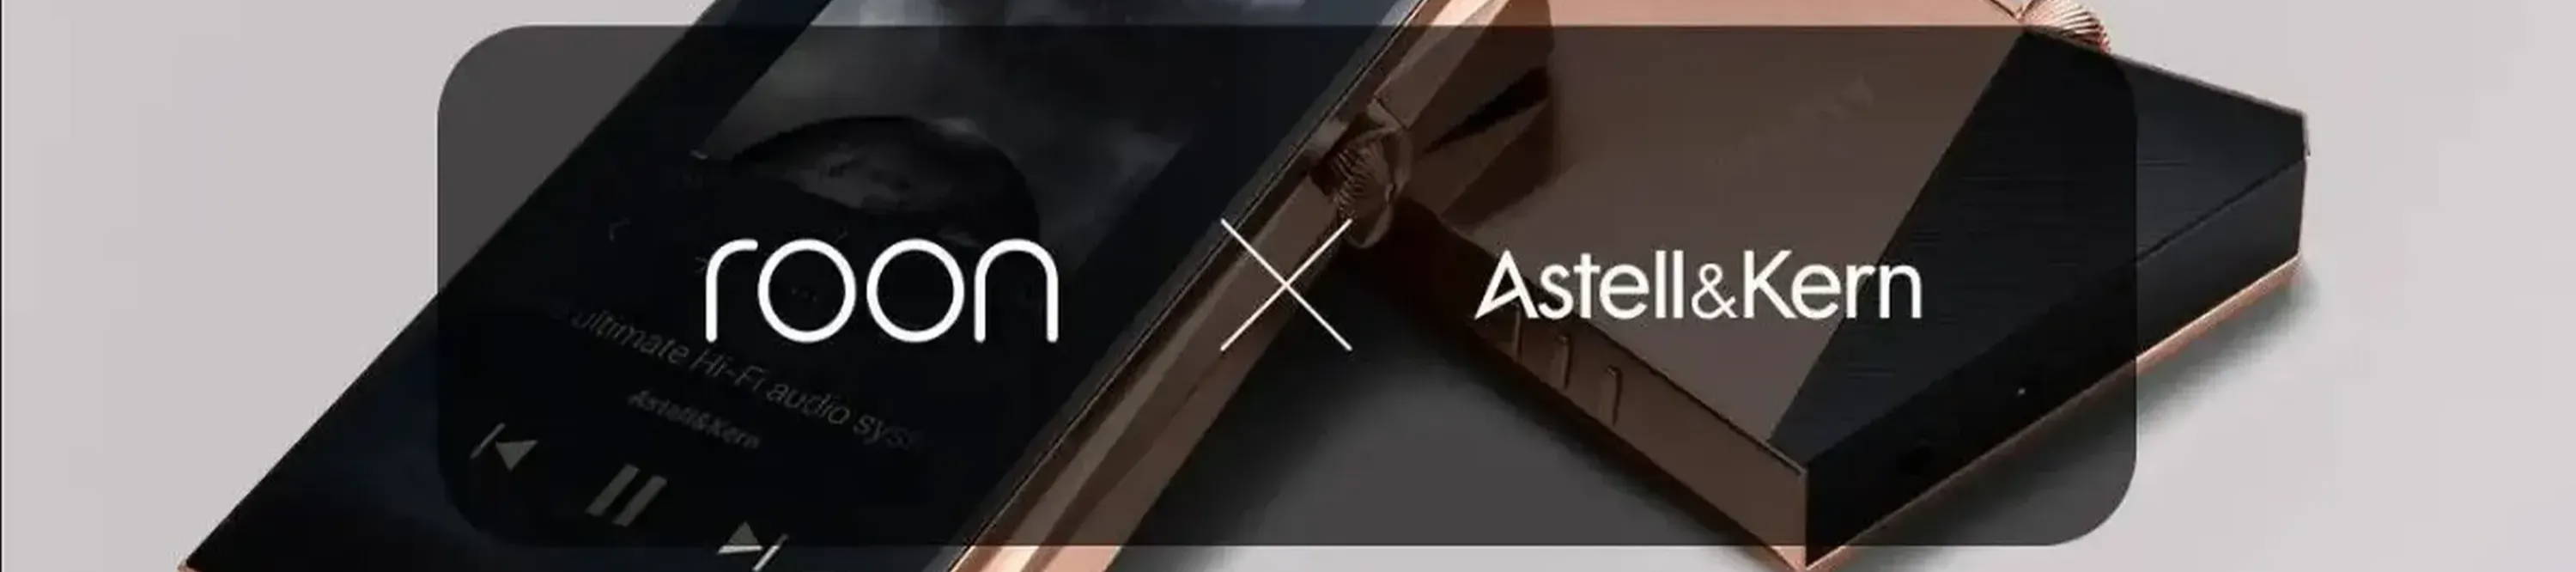 Roon and Astell&Kern banner